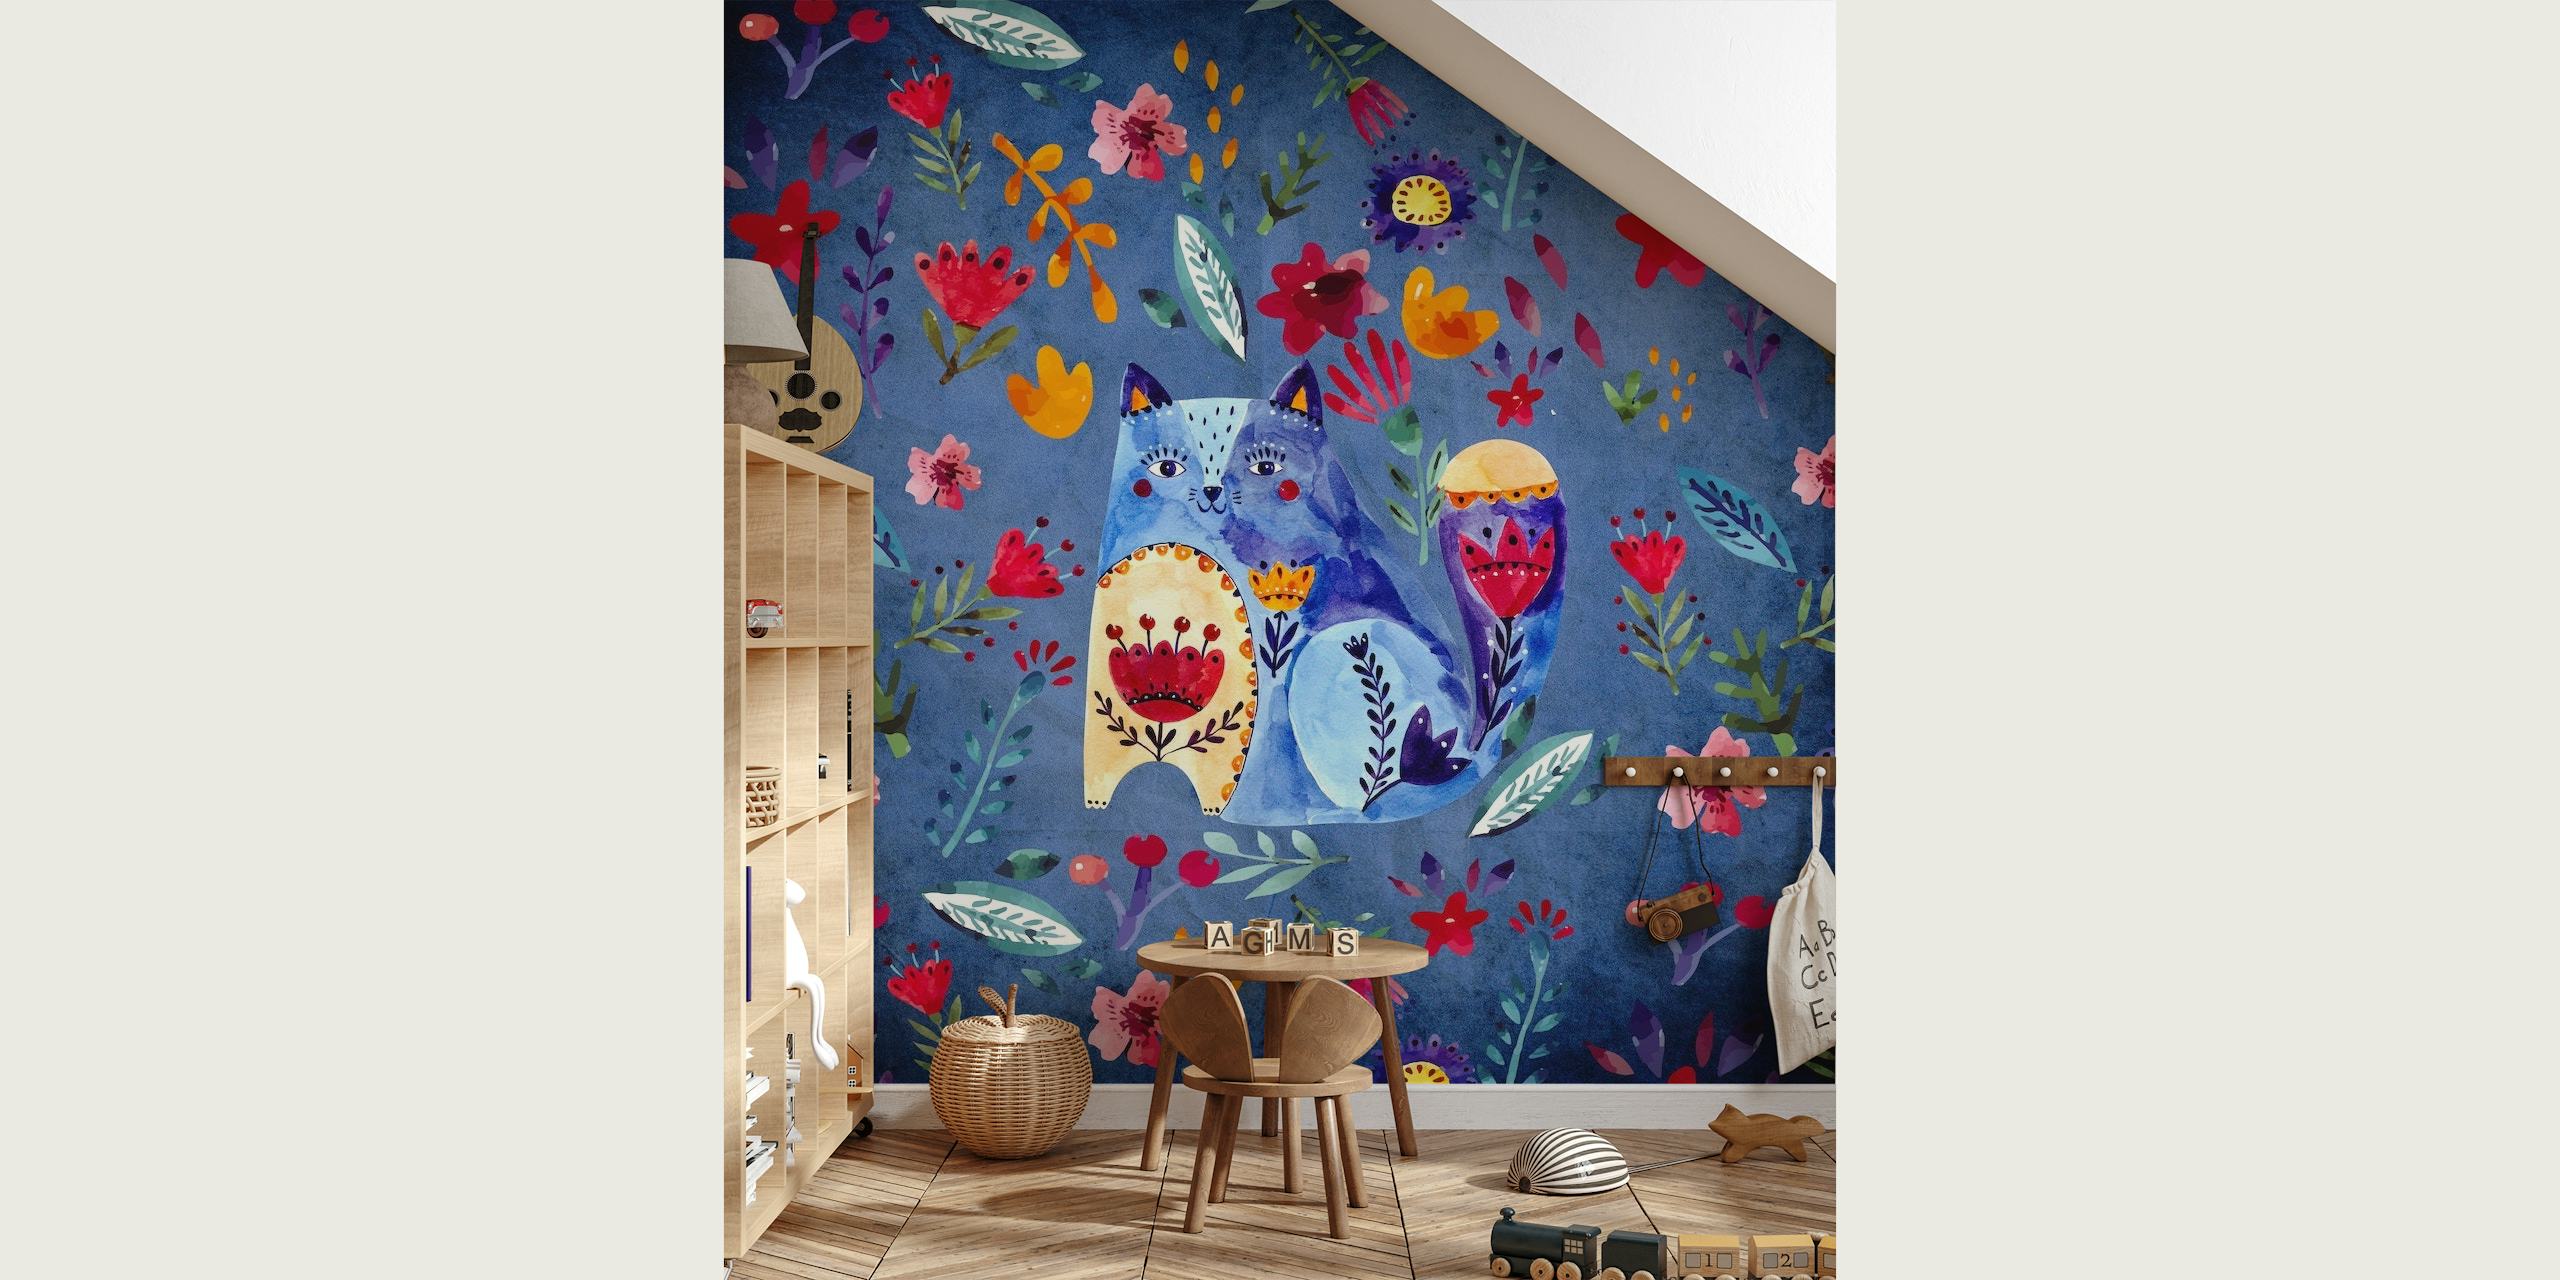 Doodle Cat and Flowers wall mural with hand-drawn cats and colorful floral patterns on a blue background.